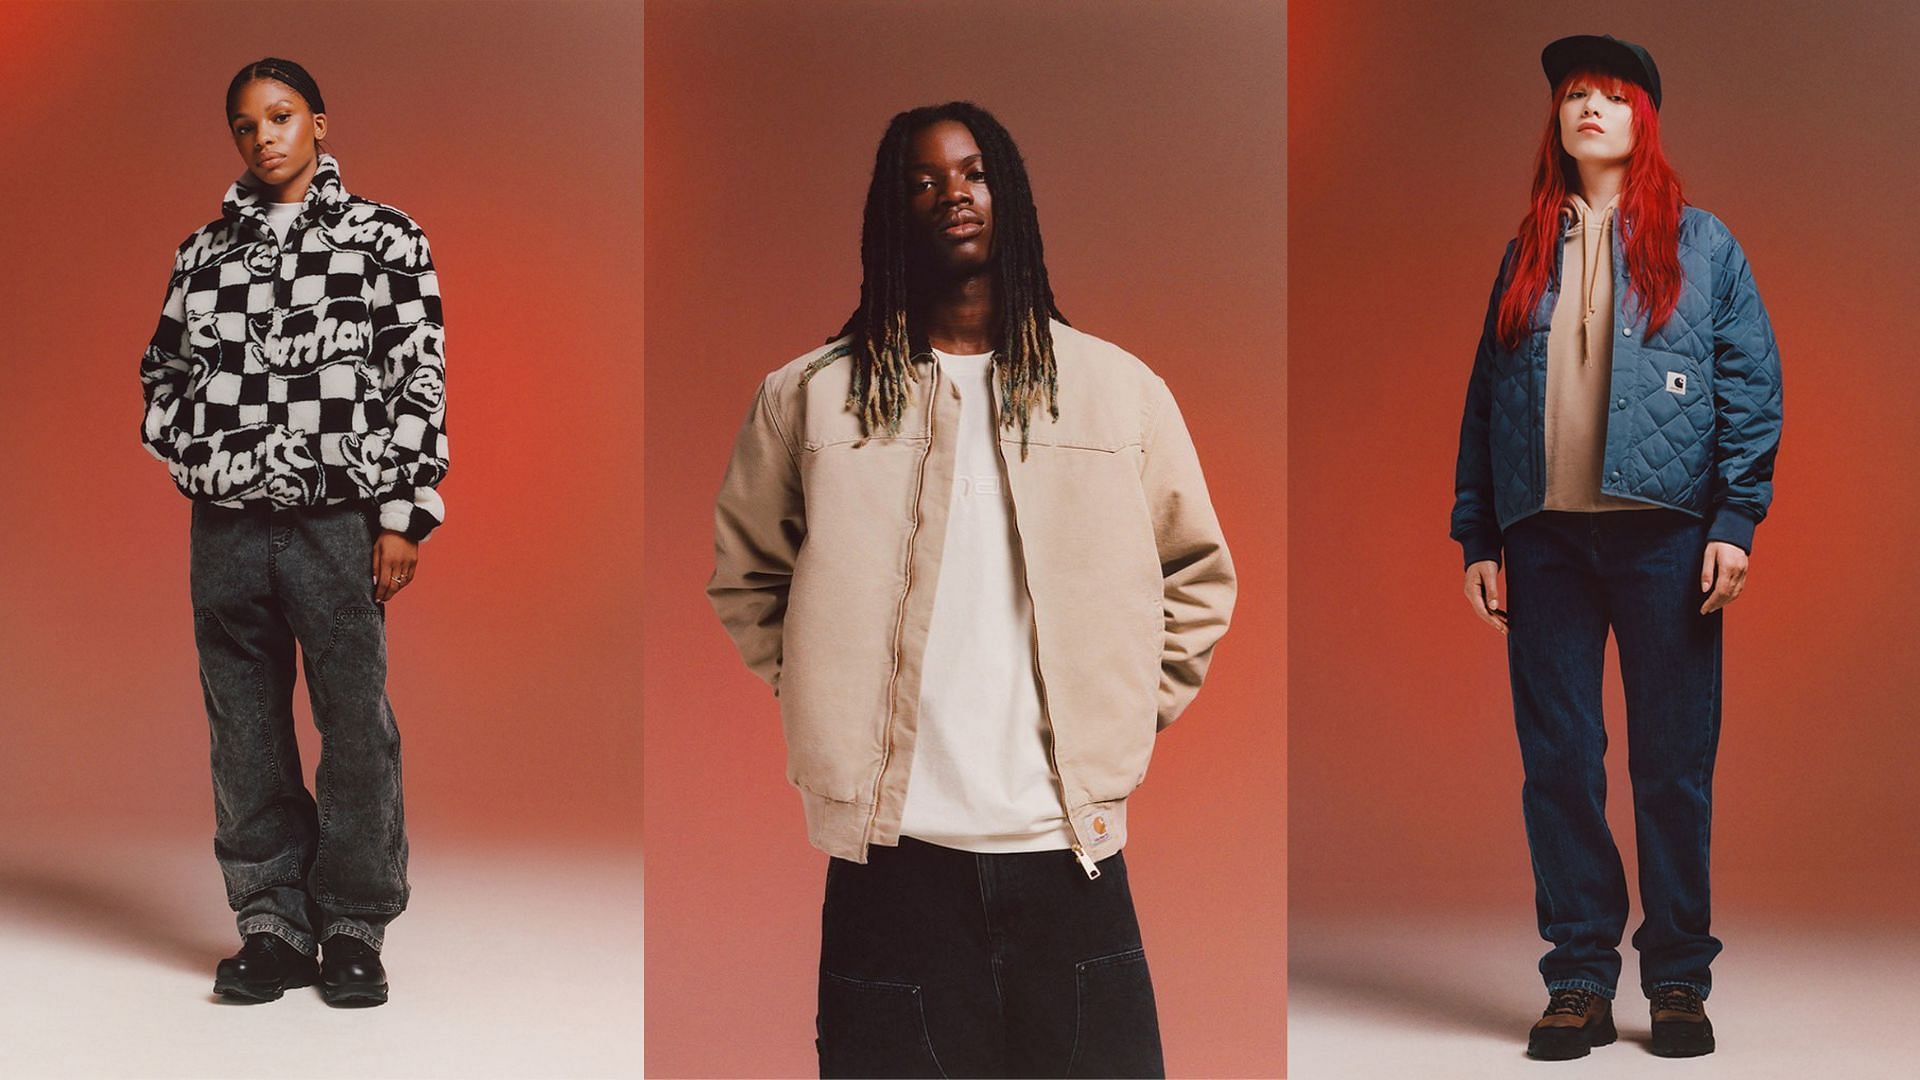 Carhartt WIP Featured Fall Staples